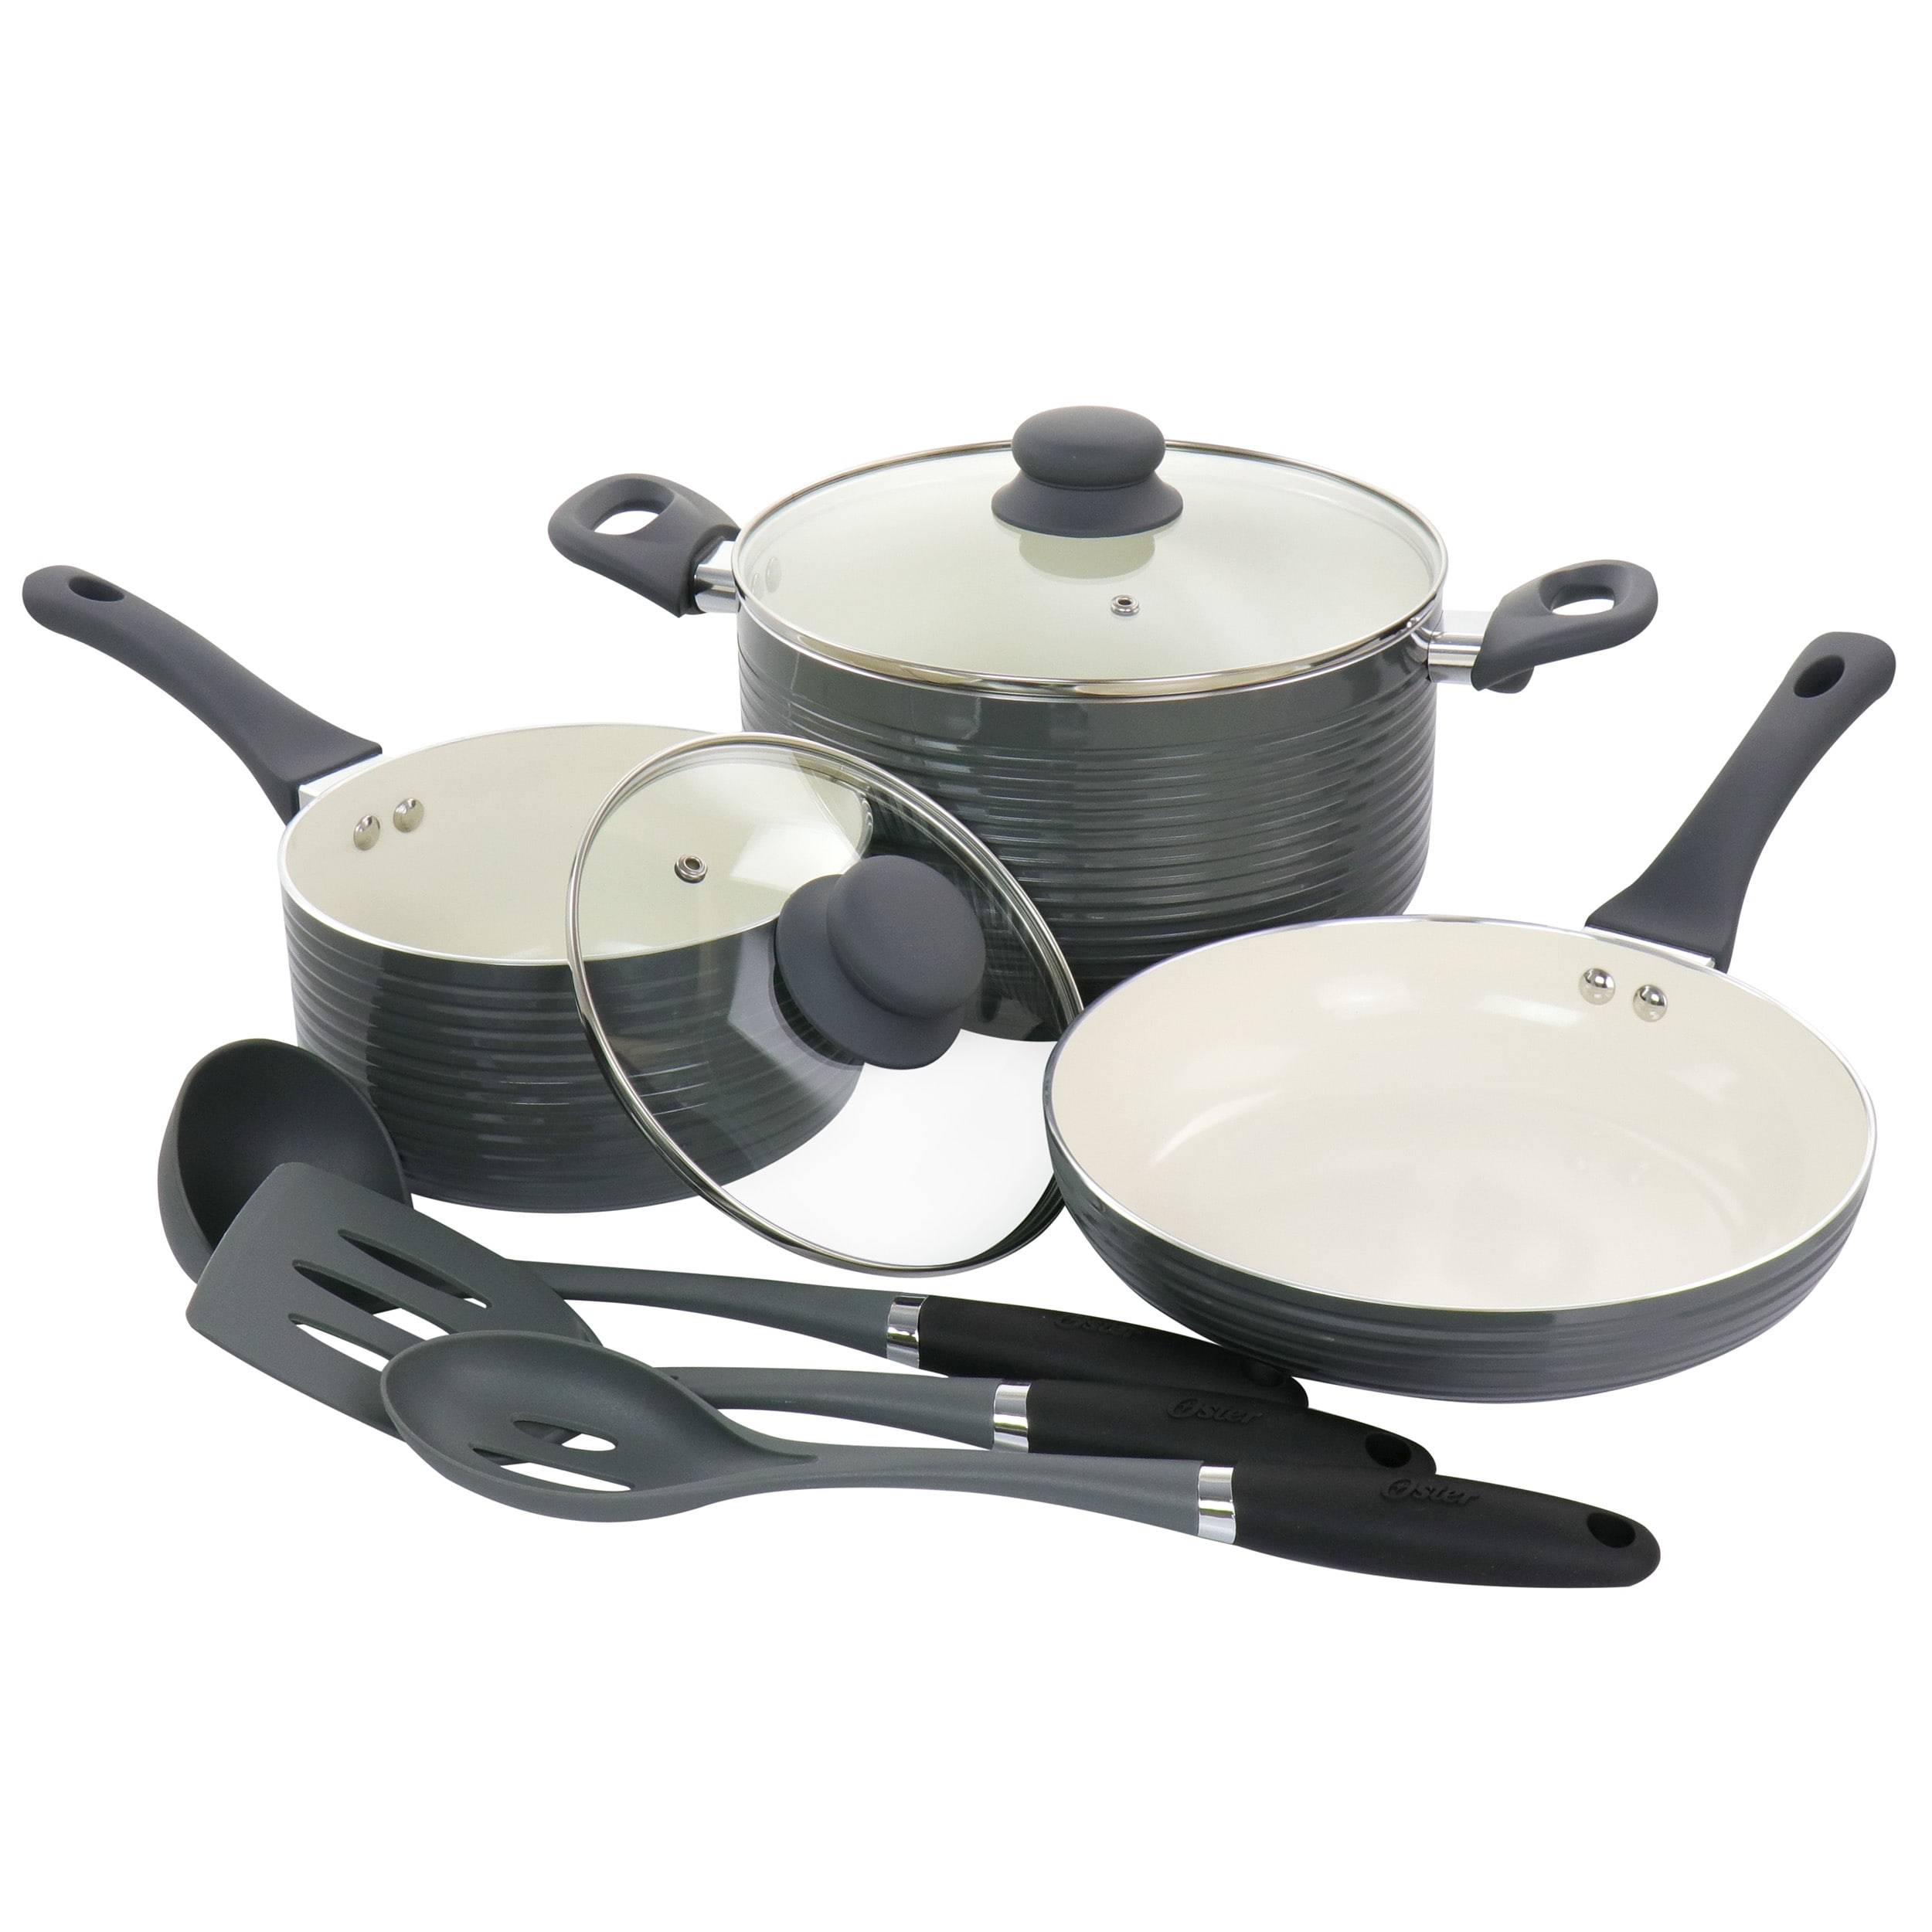 https://ak1.ostkcdn.com/images/products/is/images/direct/139d6fd7a6178b15071e879e96aa754115f0c84c/Oster-Ridge-Valley-8-Piece-Aluminum-Nonstick-Cookware-Set-in-Grey.jpg